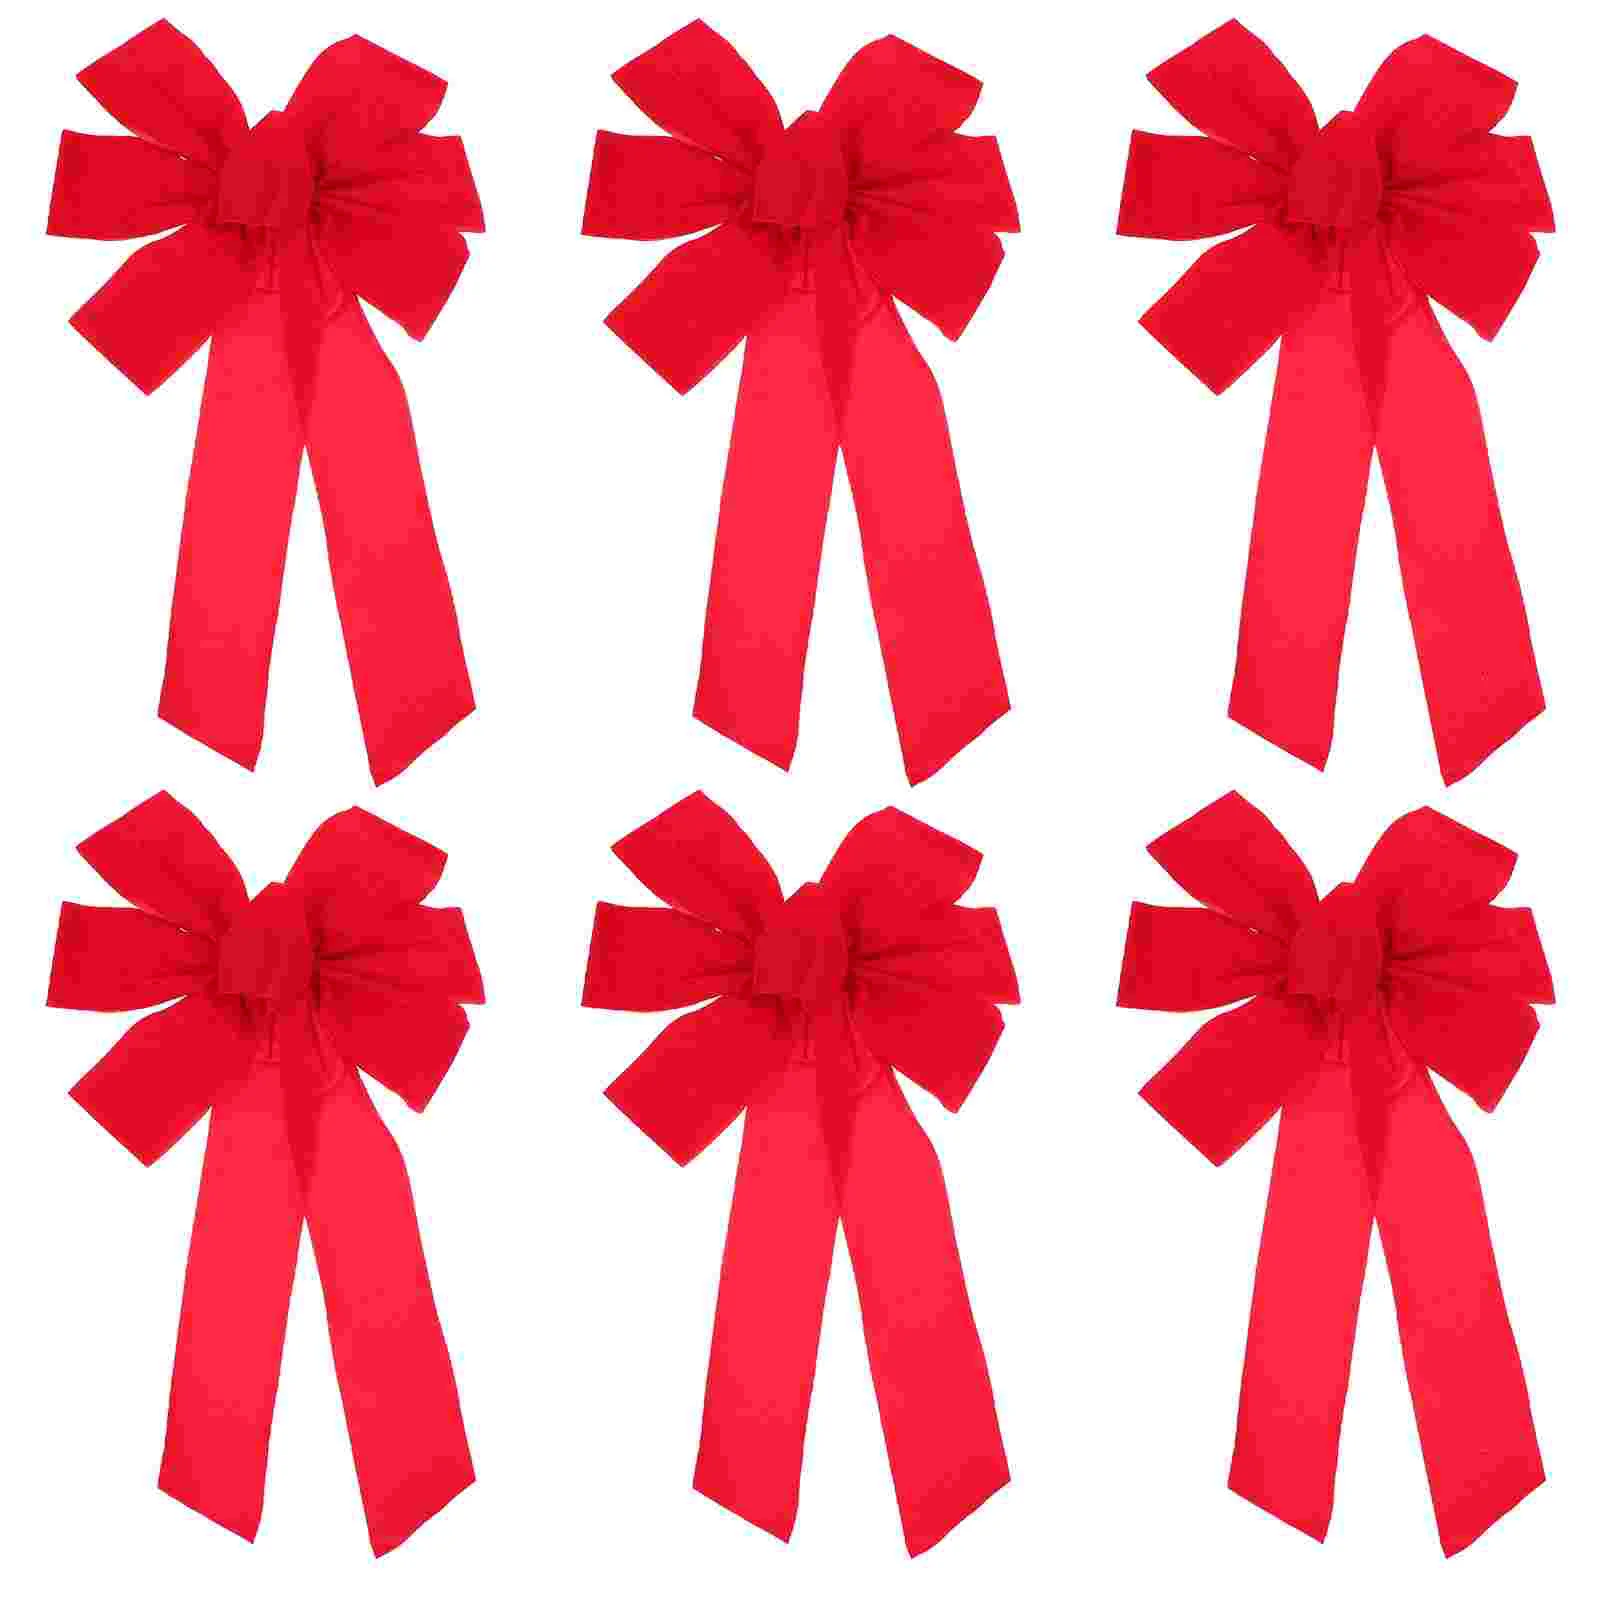 

6pcs Large Red Bow, Christmas Wreath Bow, Christmas Flannel Bowknot for Christmas Tree Xmas Decor Wreath Ornaments